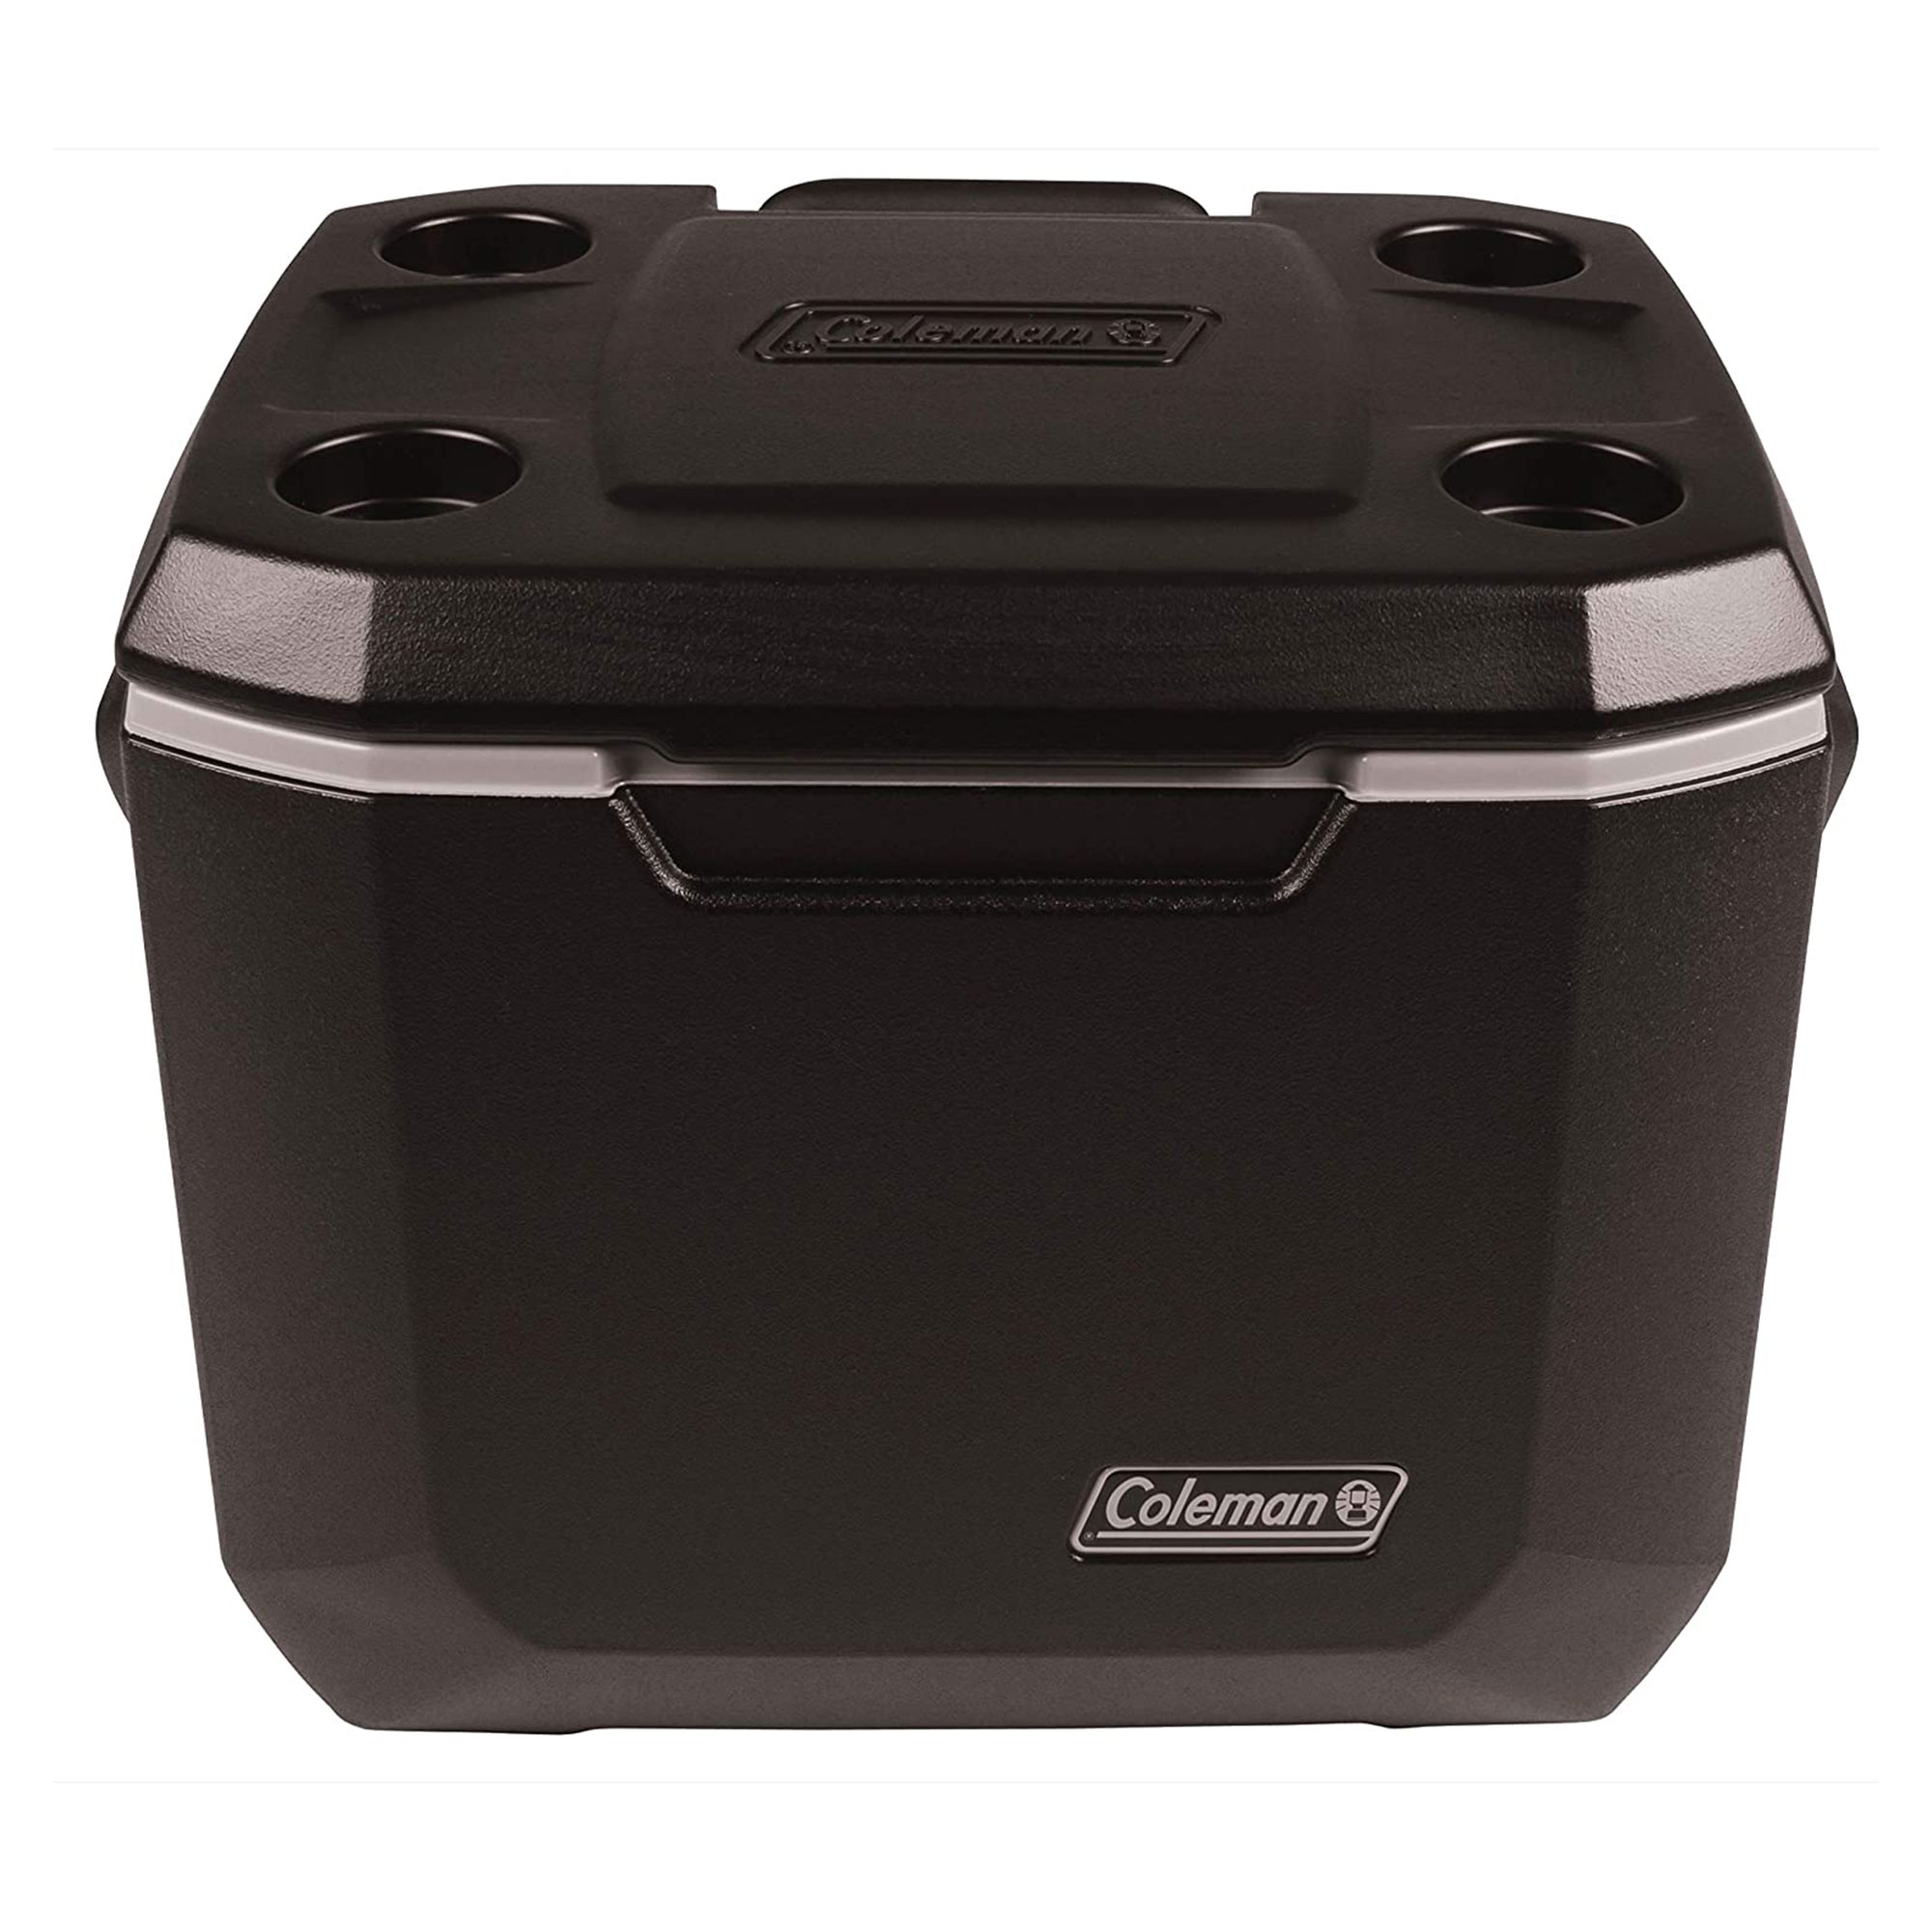 Coleman Xtreme 50 Quart 5-Day Hard Cooler with Wheels and Have-A-Seat Lid - image 3 of 9